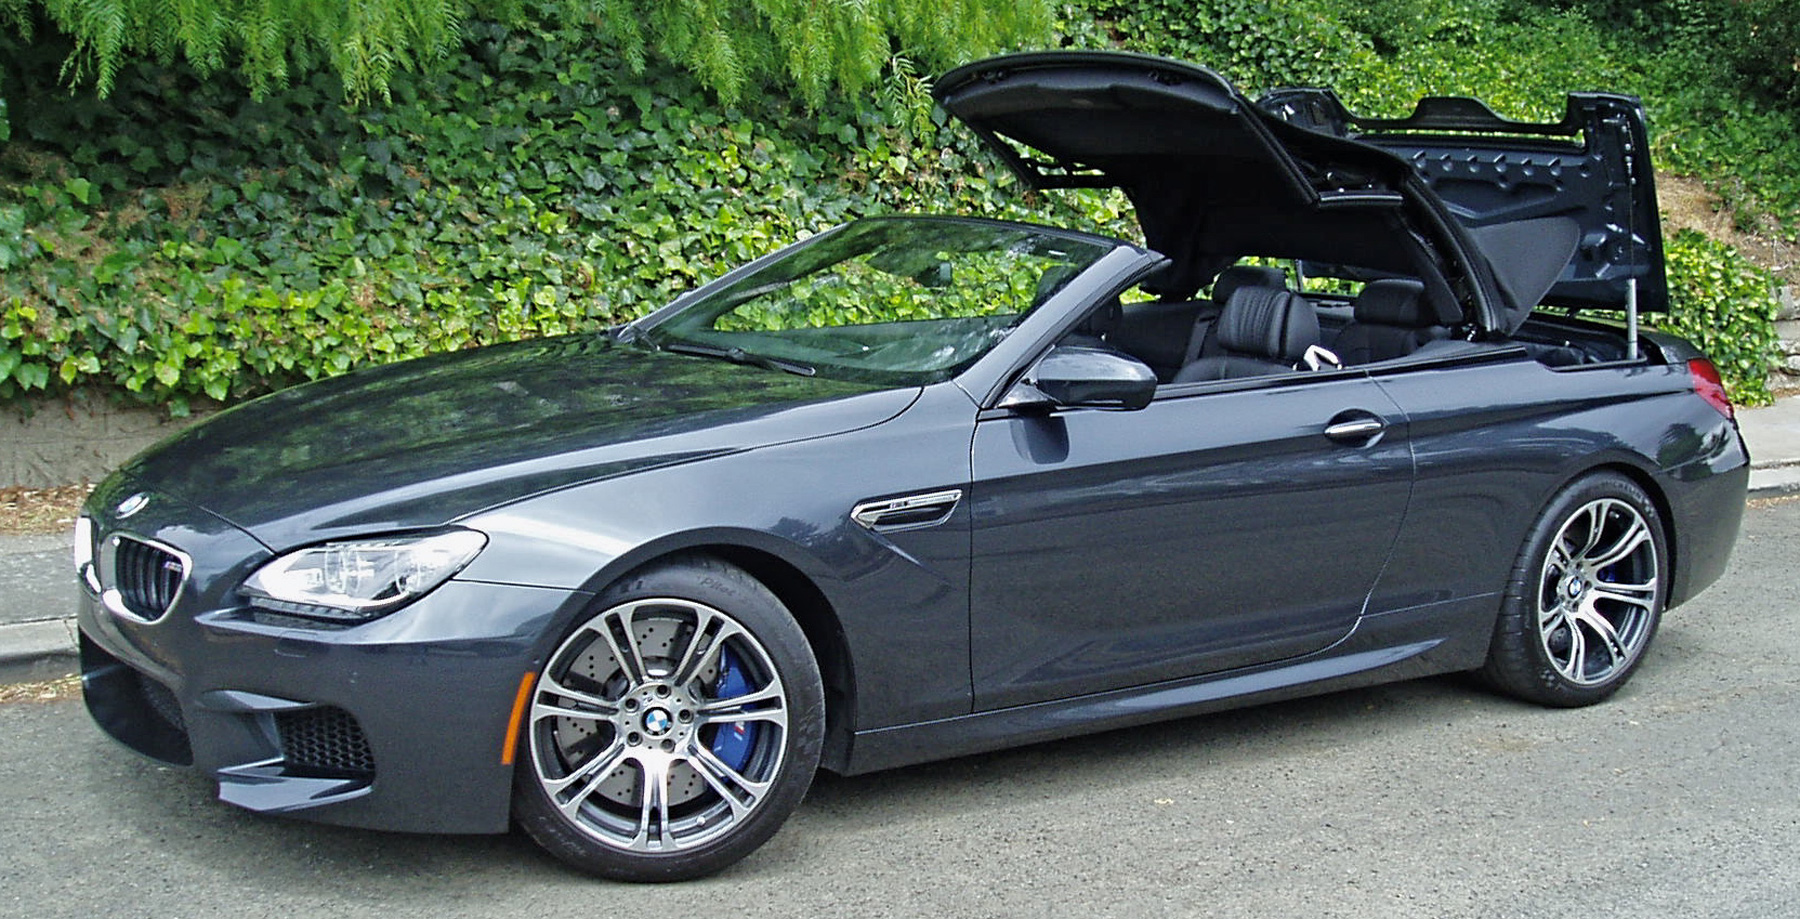 BMW M6 Convertible Pics, Vehicles Collection